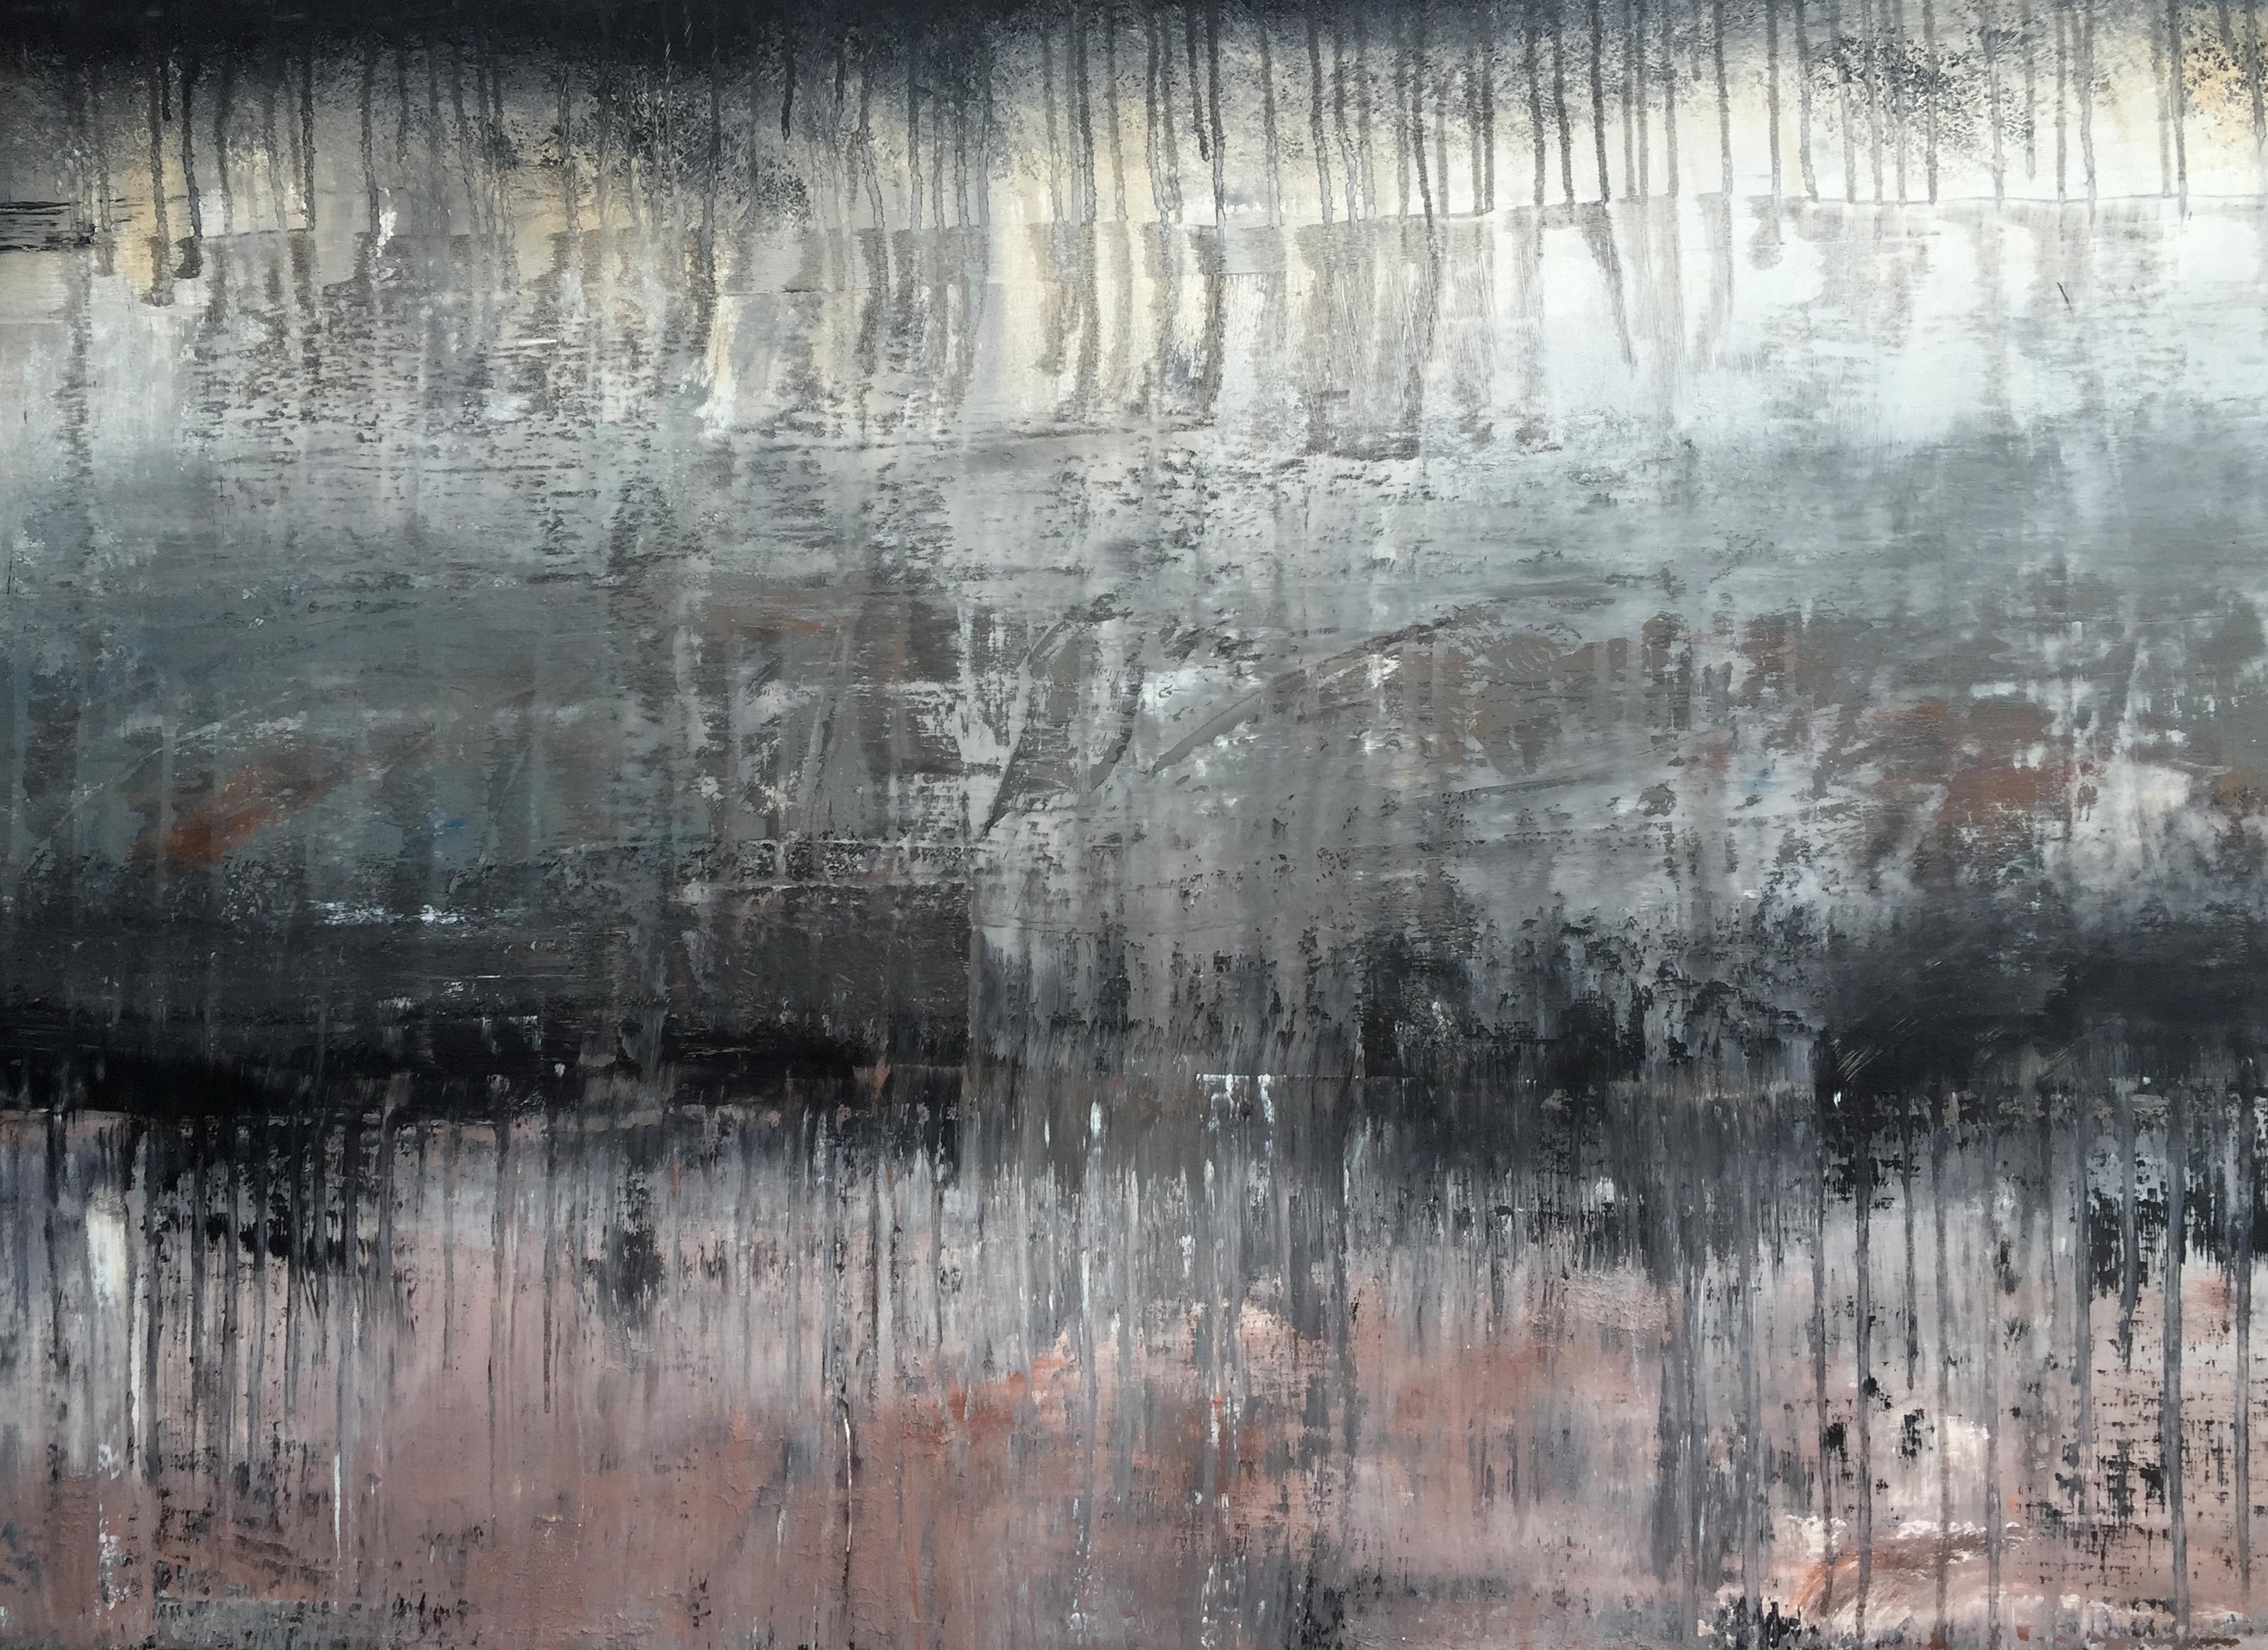 Roger König Landscape Painting - "Abstract Historic Wall No.1" - Abstract, Painting, 21st Century, Acryl and Clay